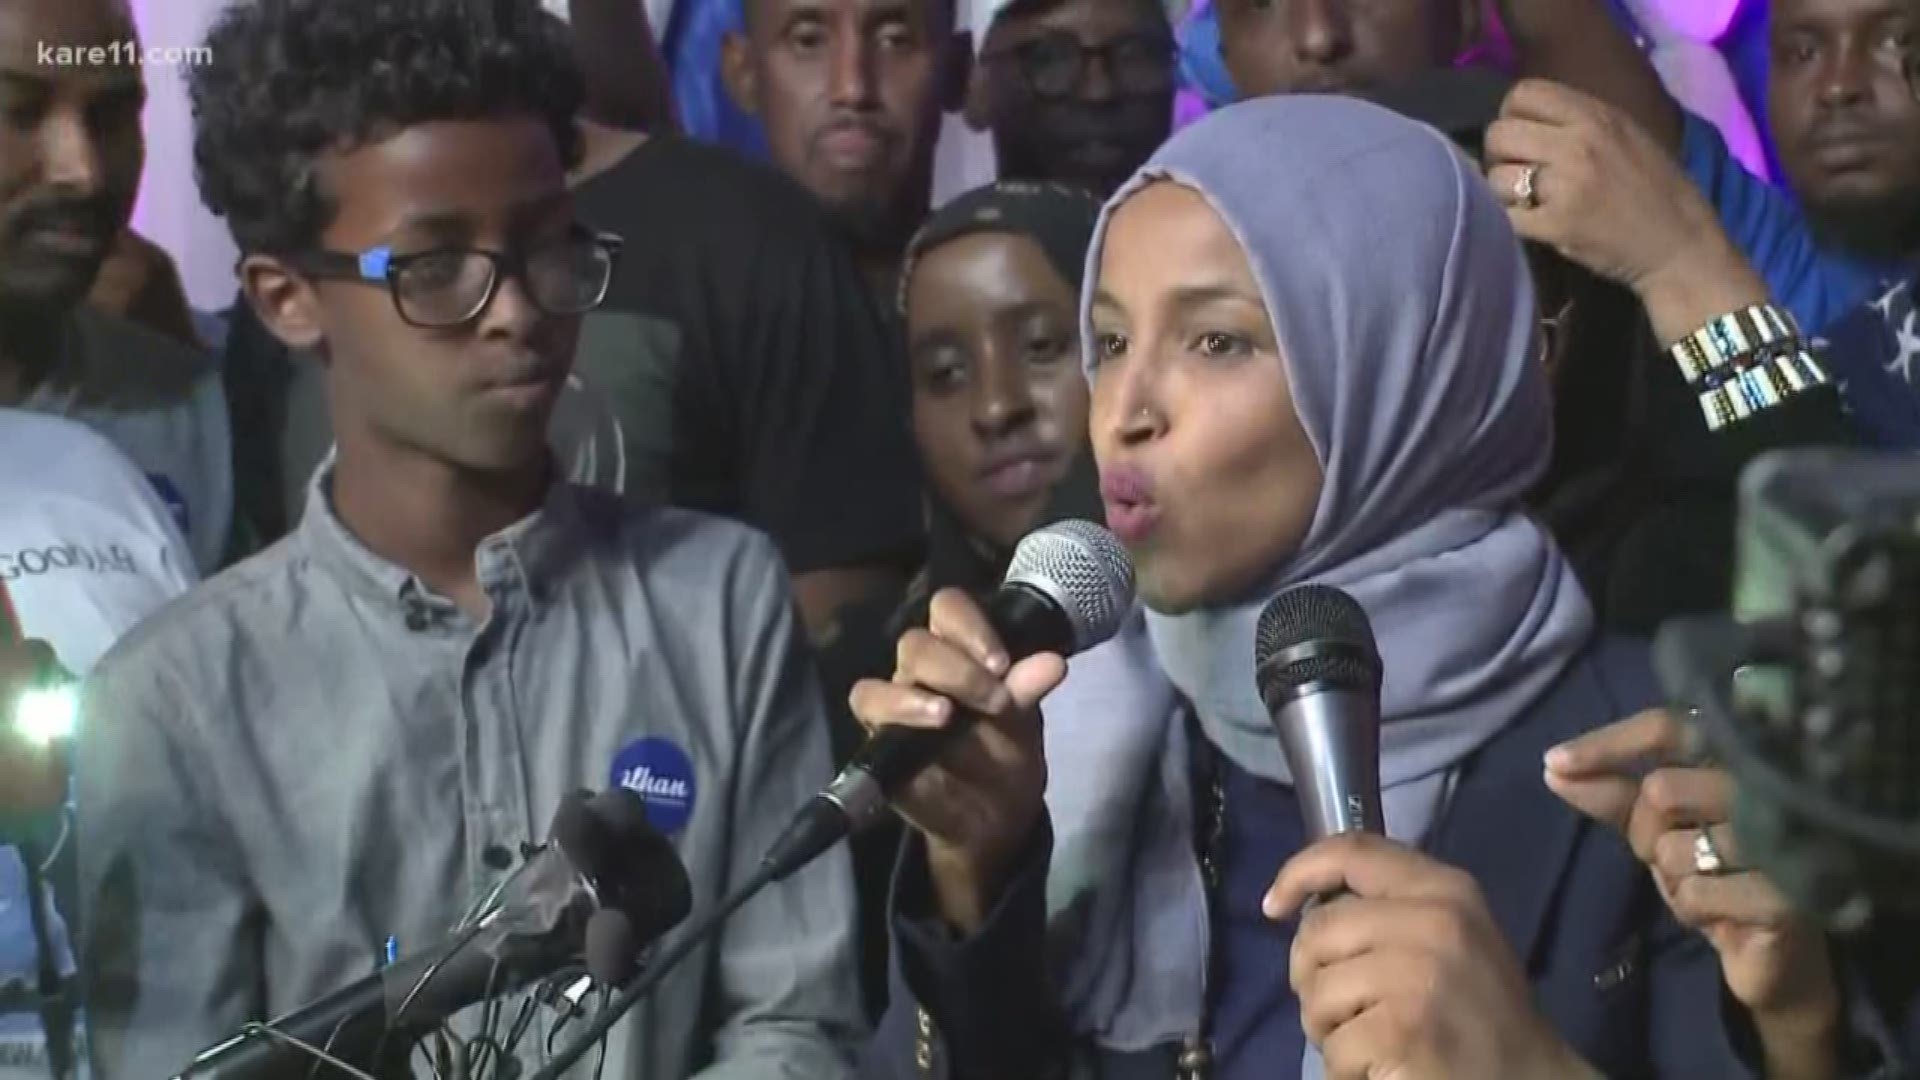 Omar became the flash point after she suggested last week that Israel's supporters are pushing U.S. lawmakers to take a pledge of "allegiance to a foreign country." https://kare11.tv/2VEjkUD